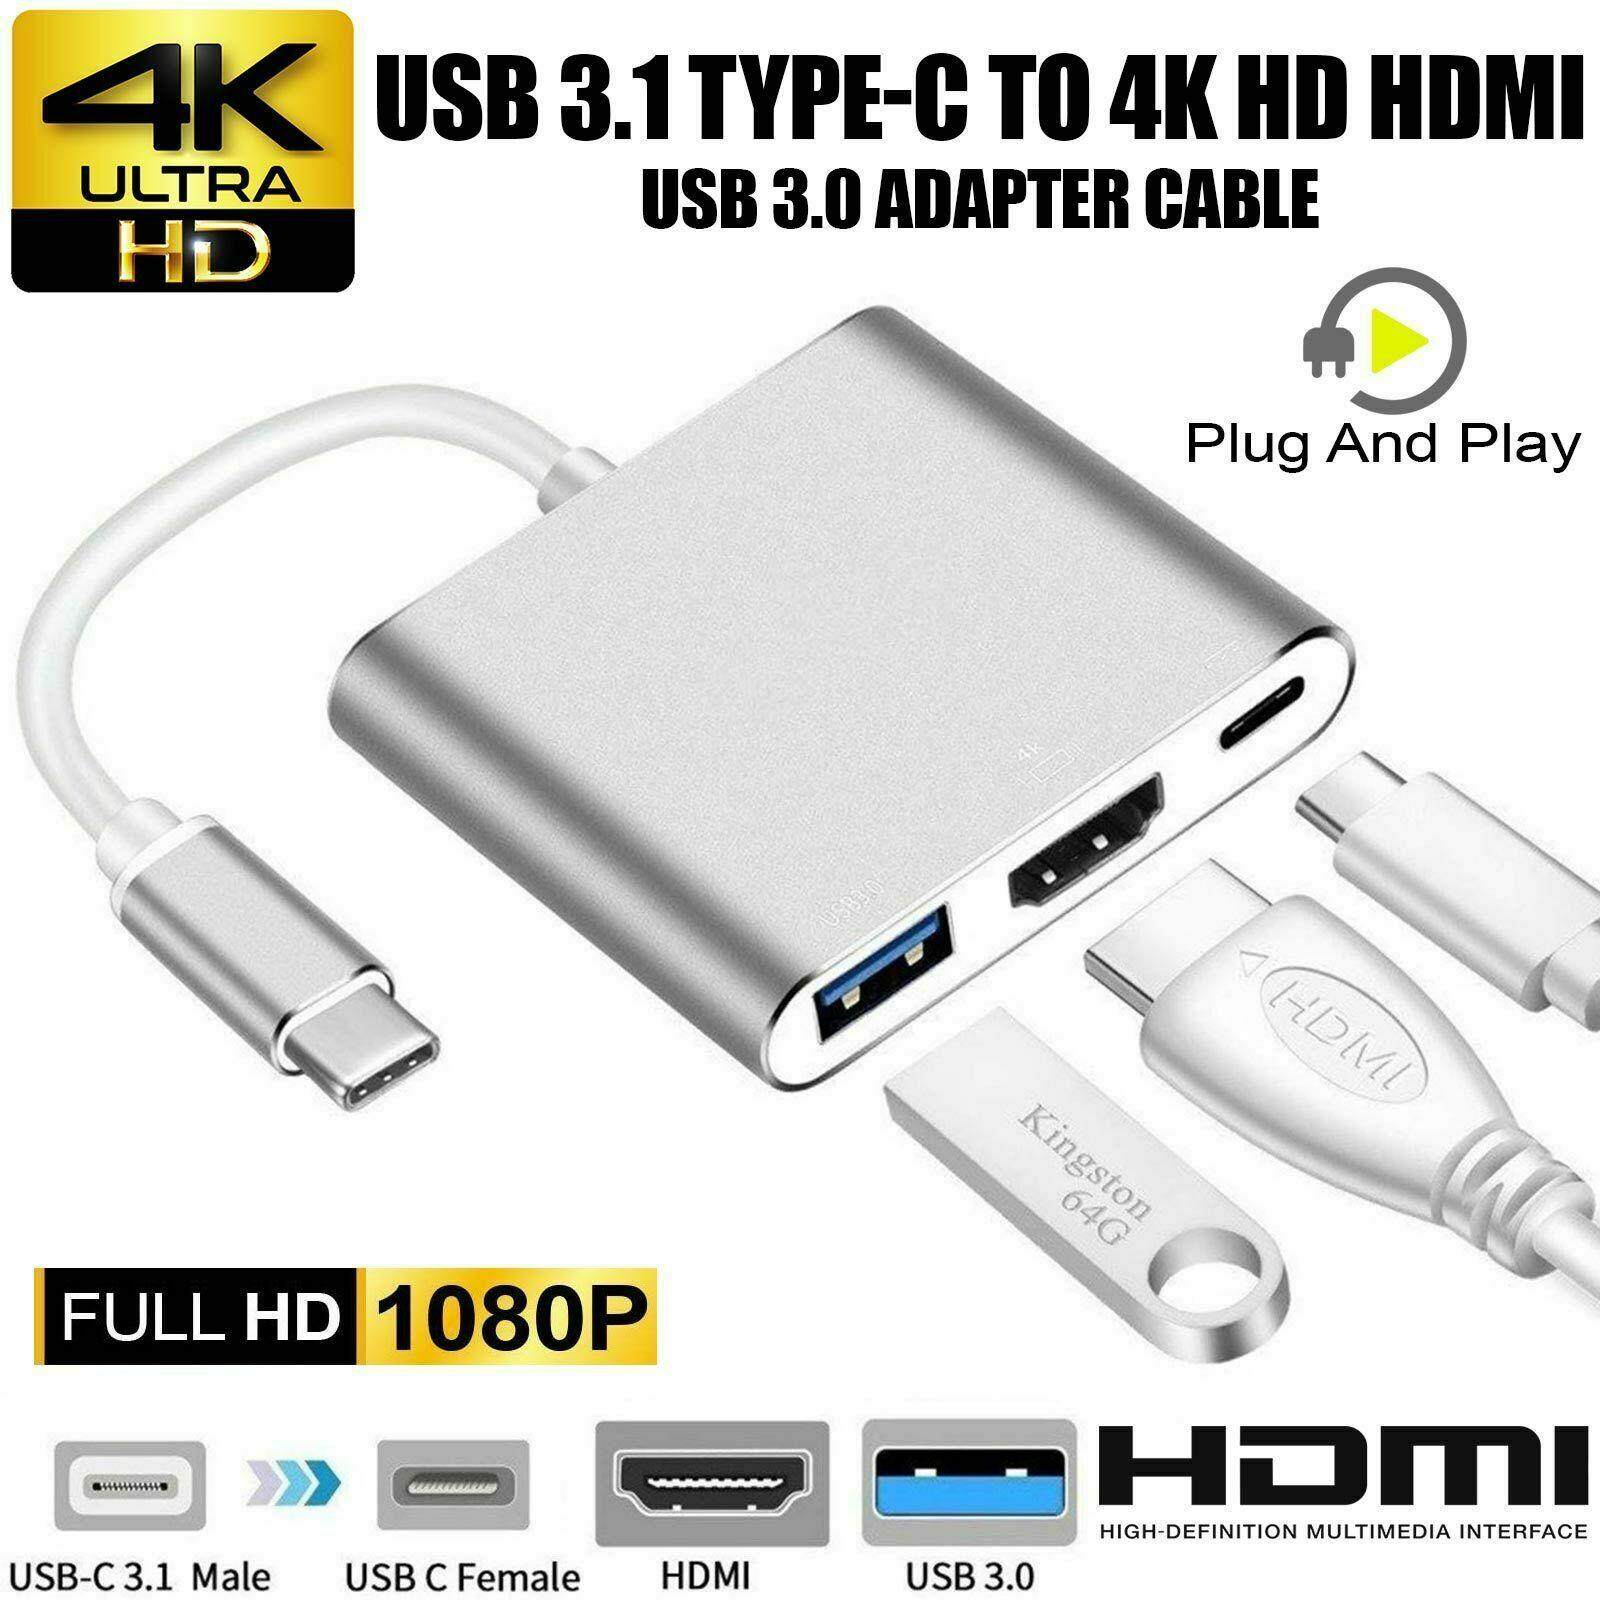 USB 3.1 Type-C to HDTV 4K HDMI/USB 3.0/Type C Converter Cable Adapter for Macbook Laptop